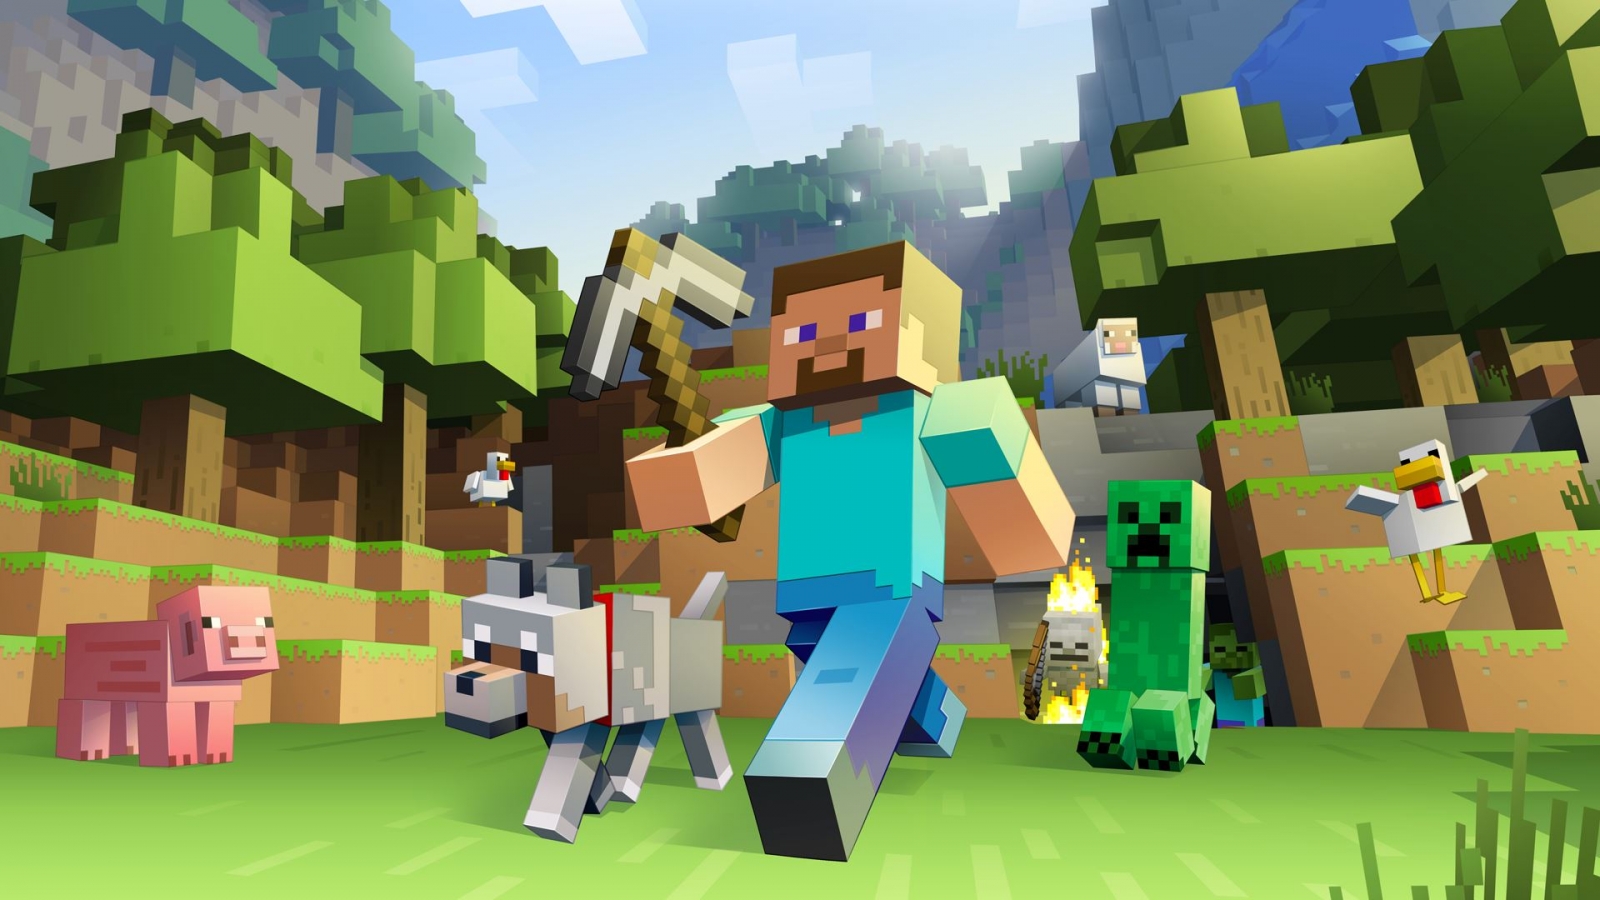 Minecraft Earth Available for Android in Early Access!